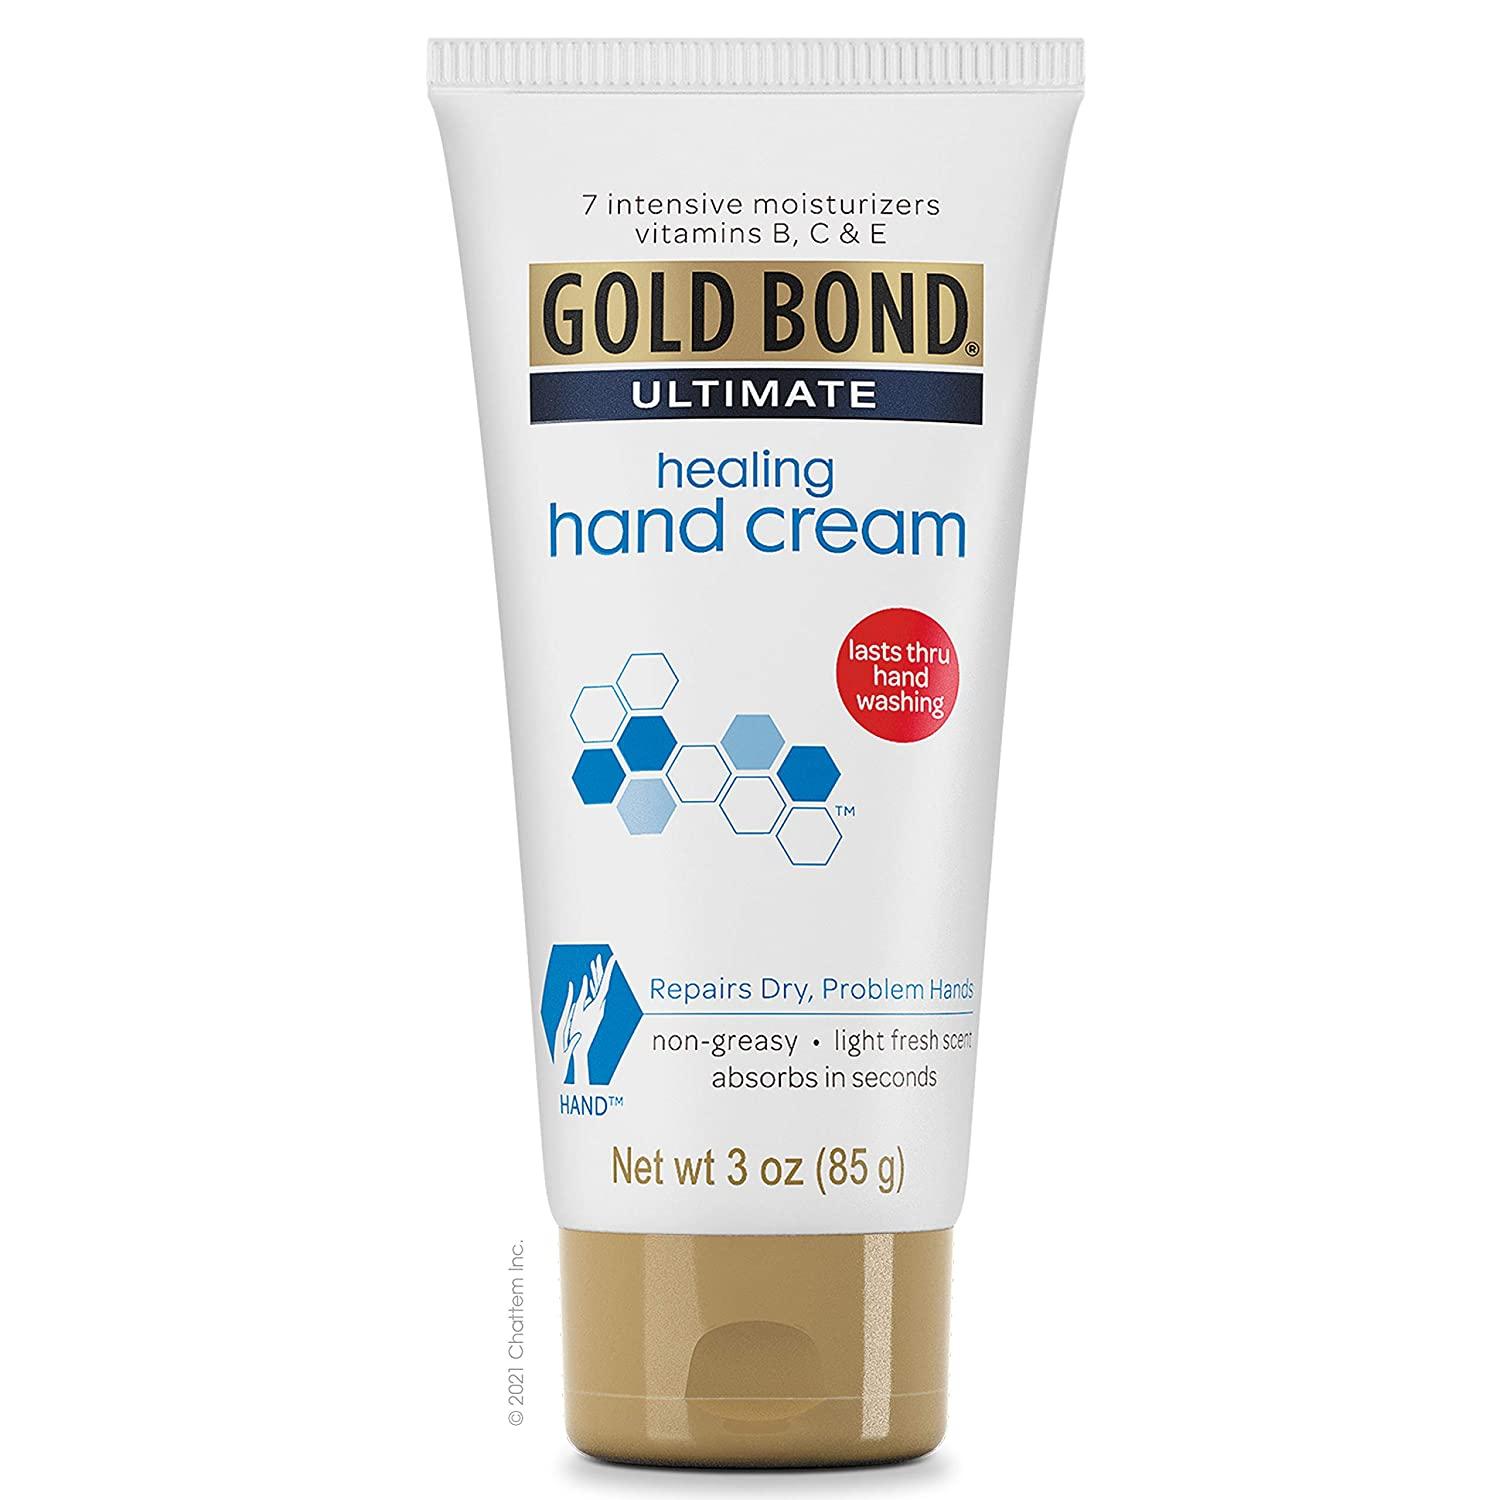 3x Gold Bond Ultimate Intensive Healing Hand Cream for $6.96